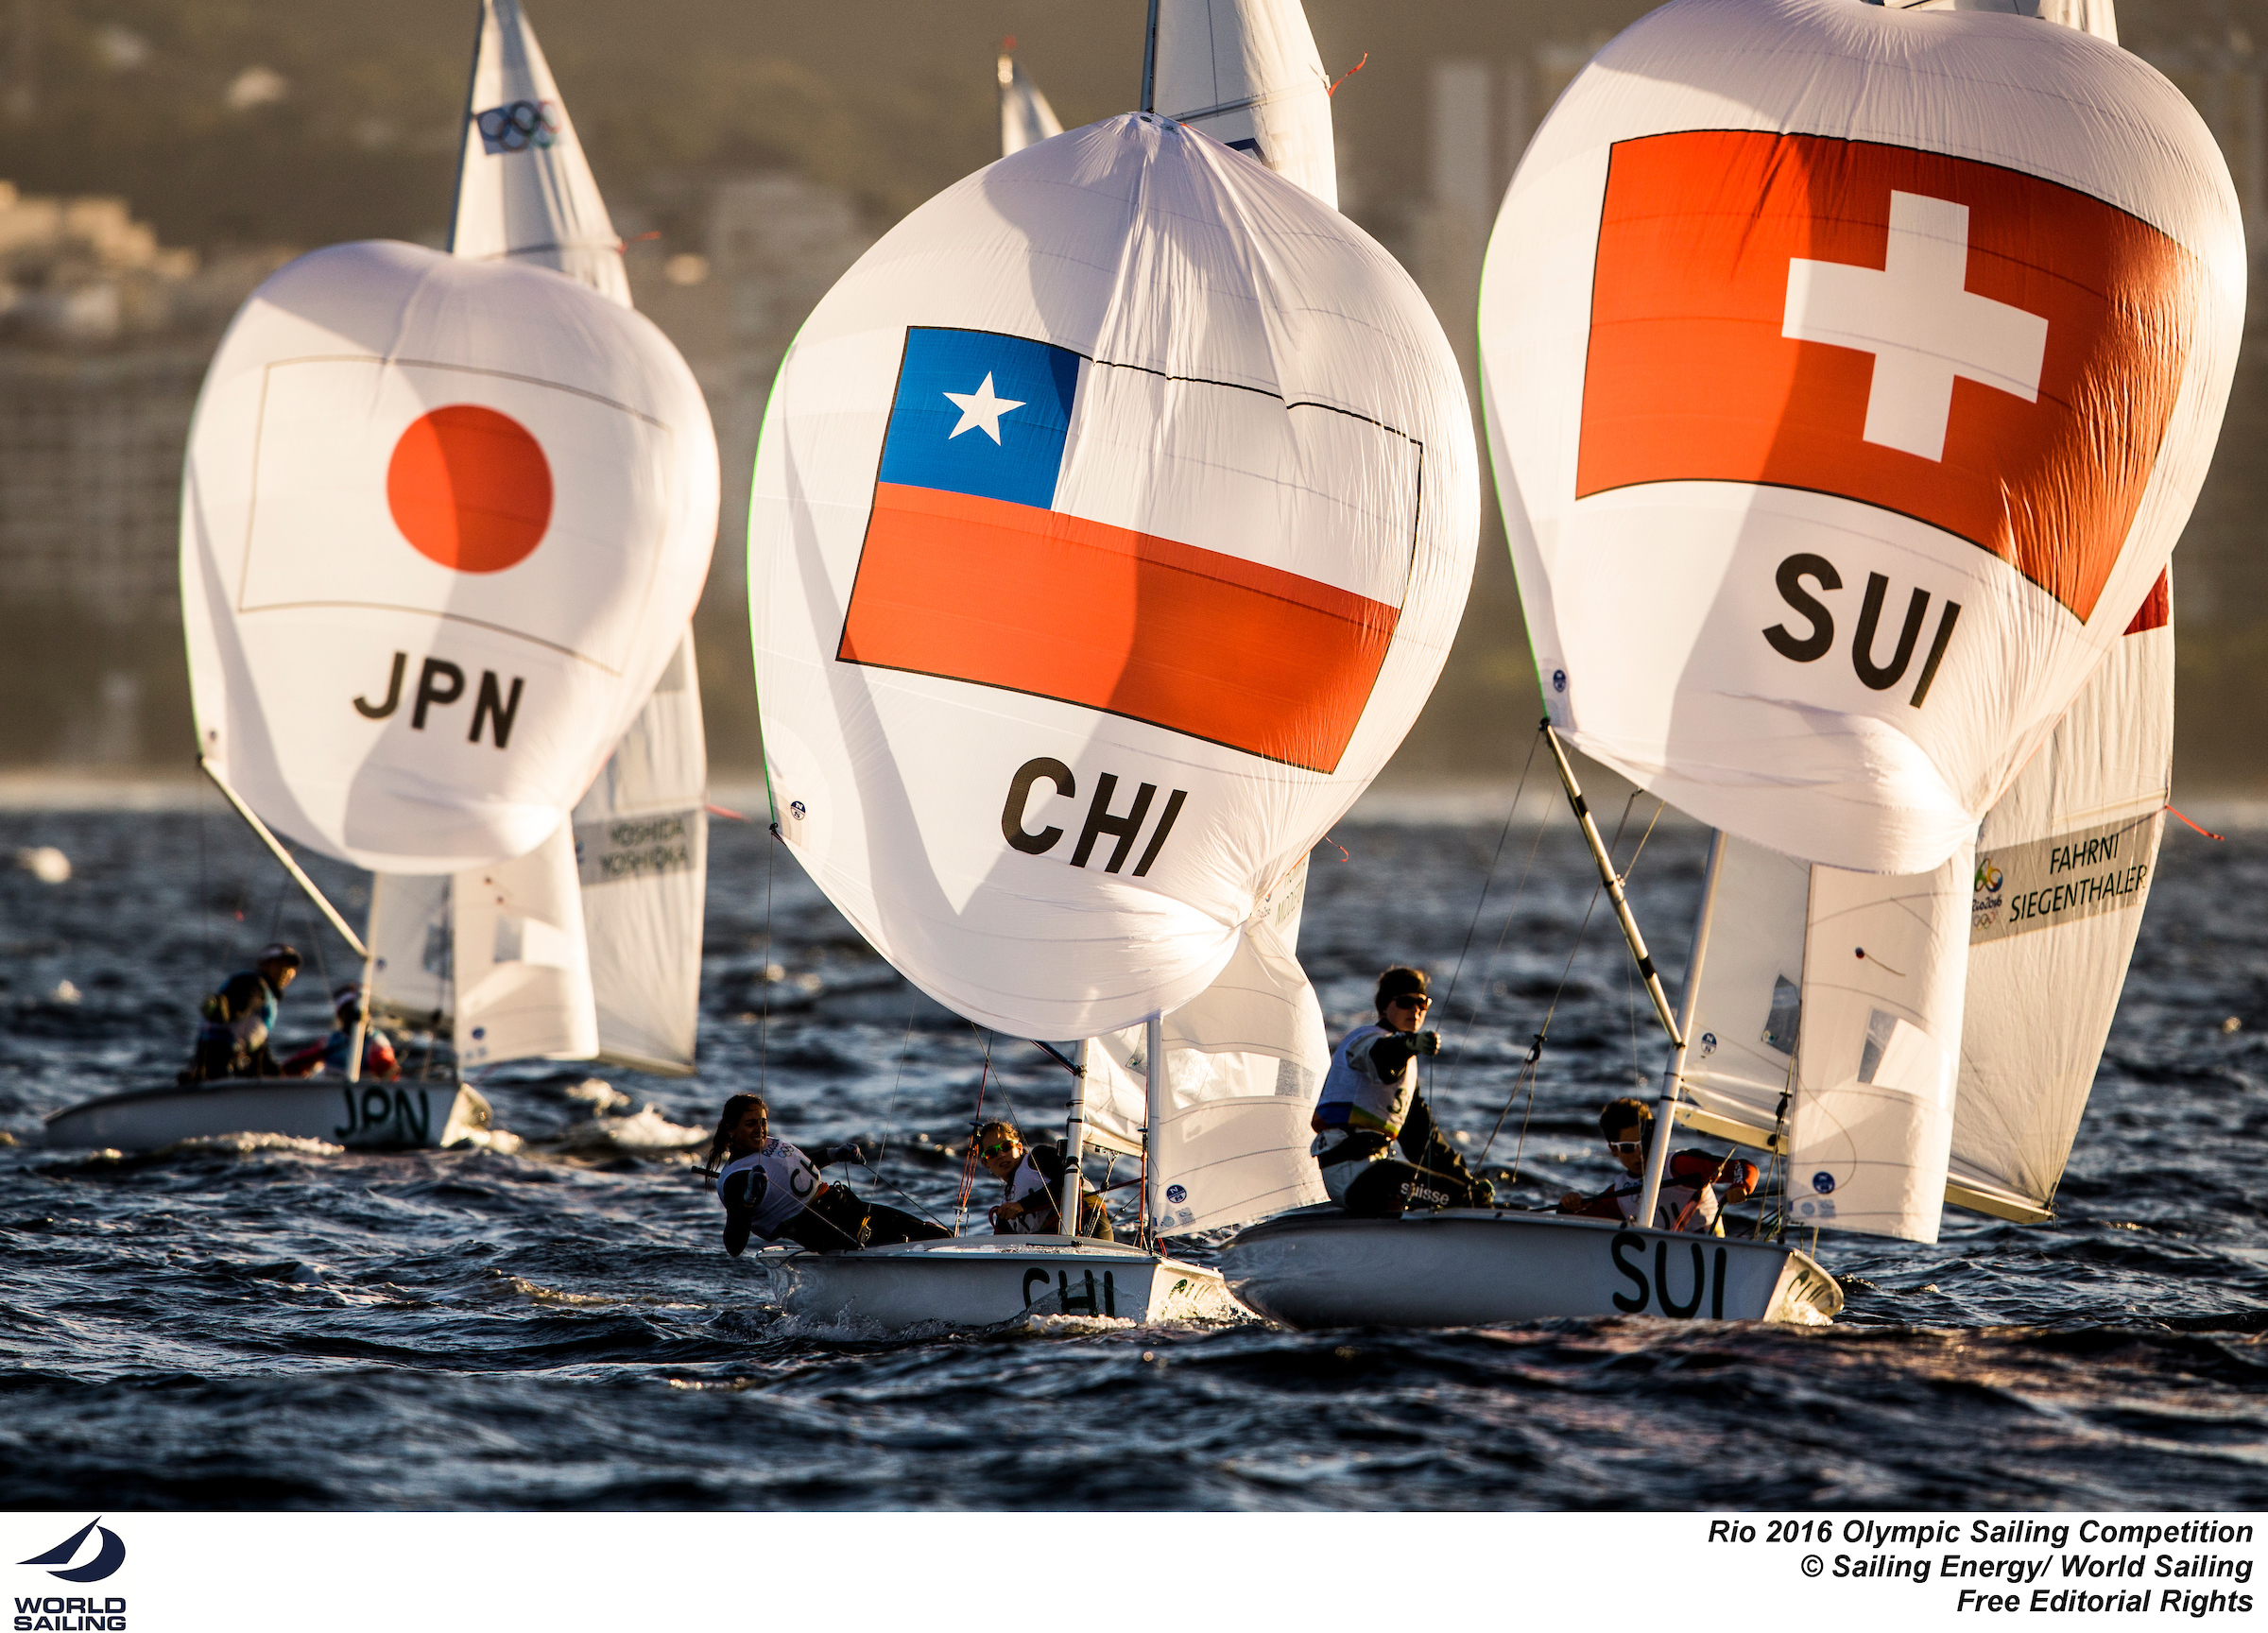 Switzerland, Chile and Japan in race 5